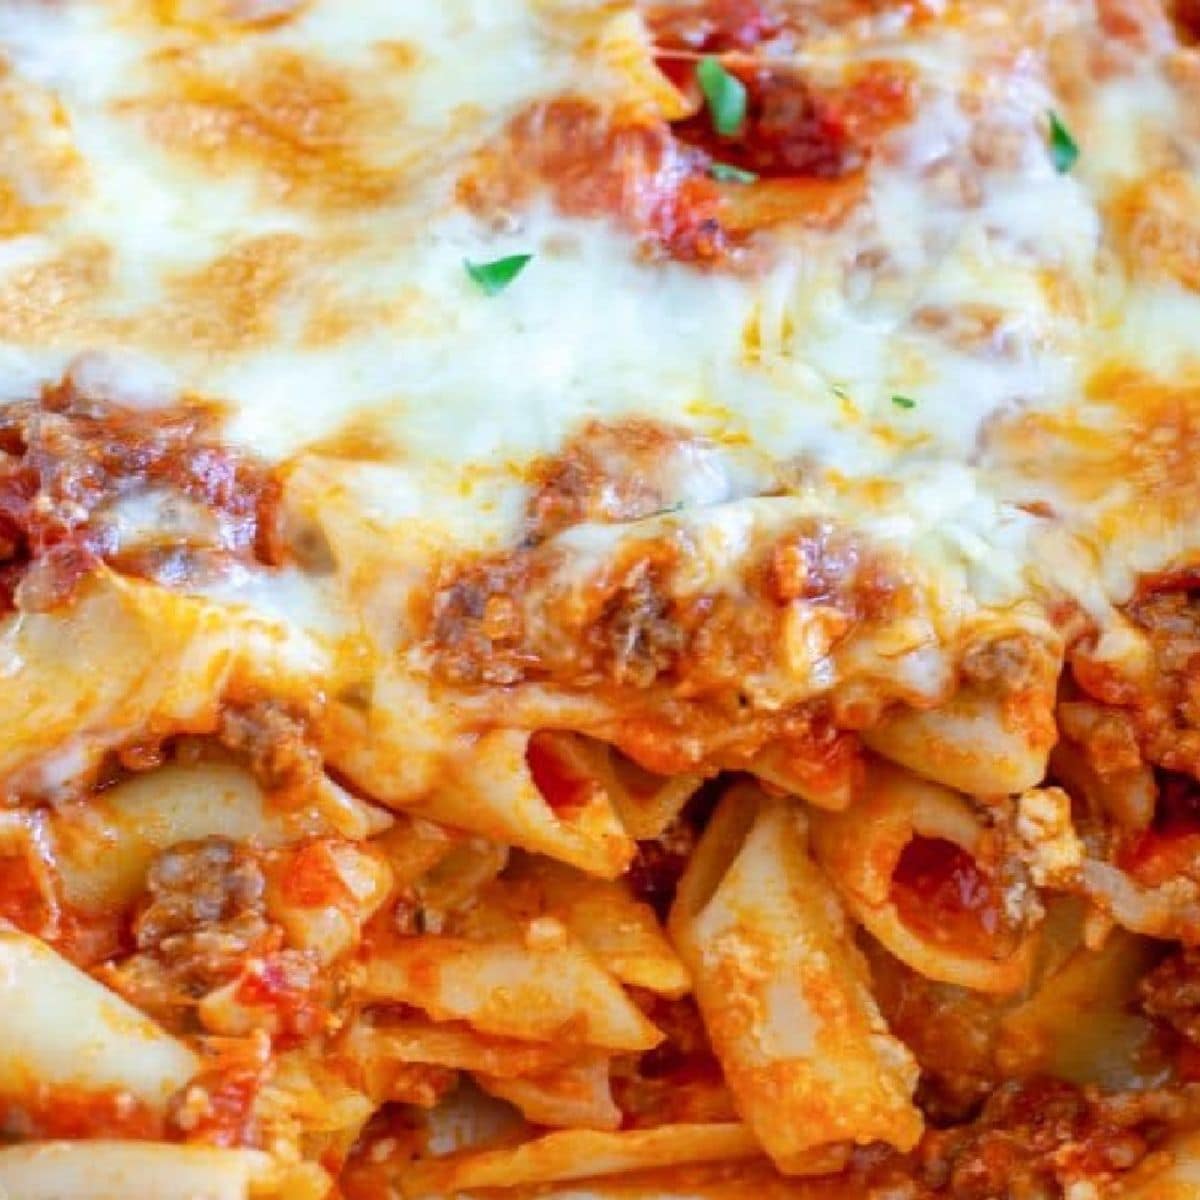 Baked pasta with sausage and melted cheese. 